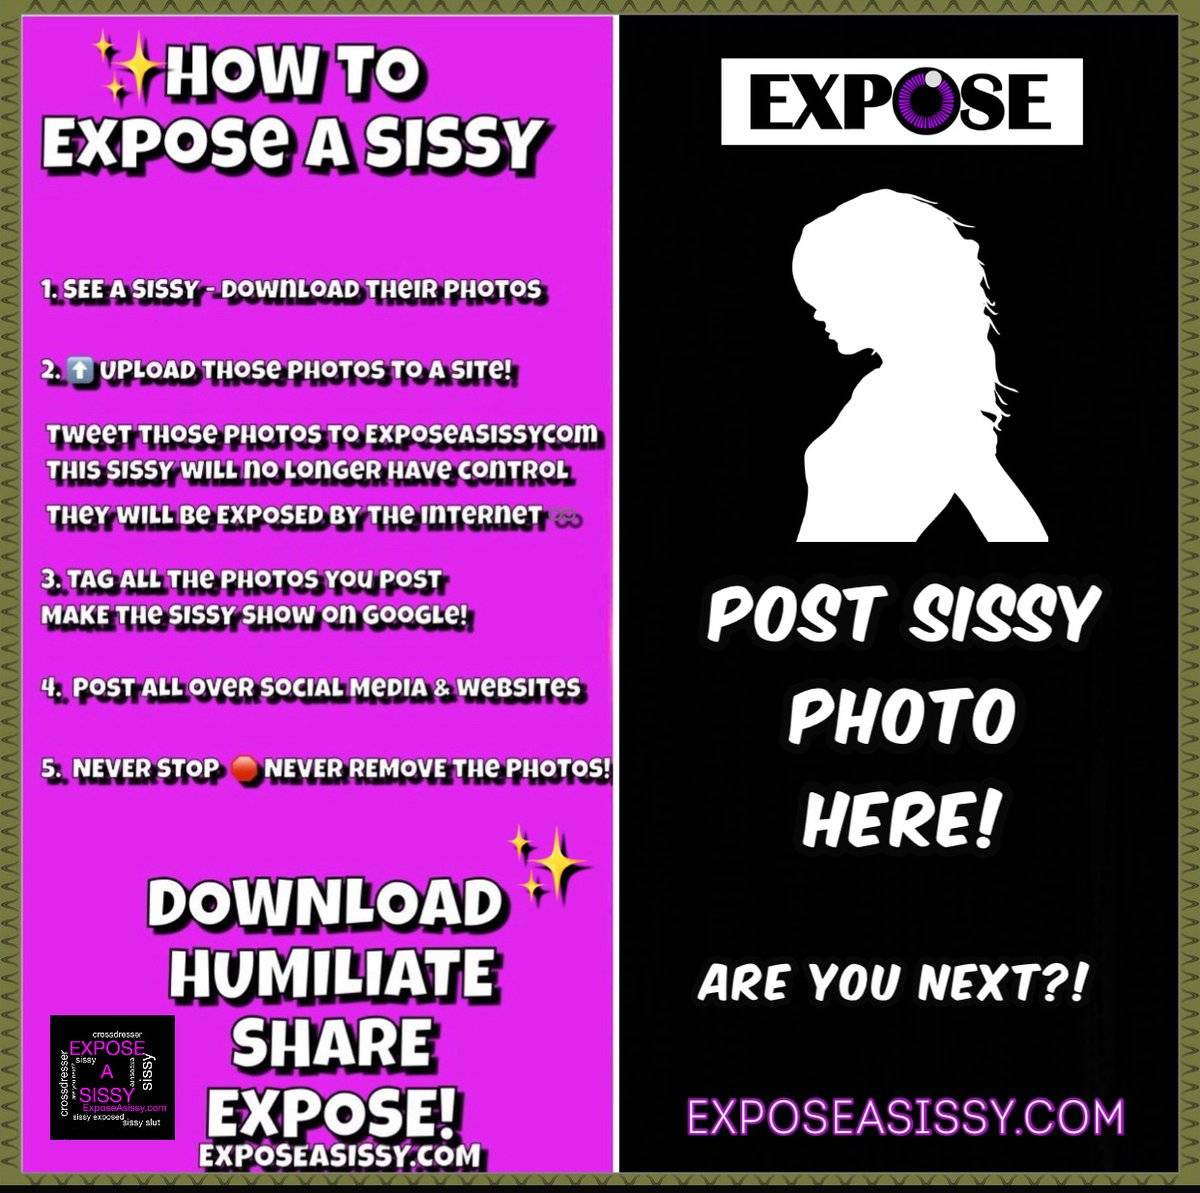 How to Expose A Sissy!